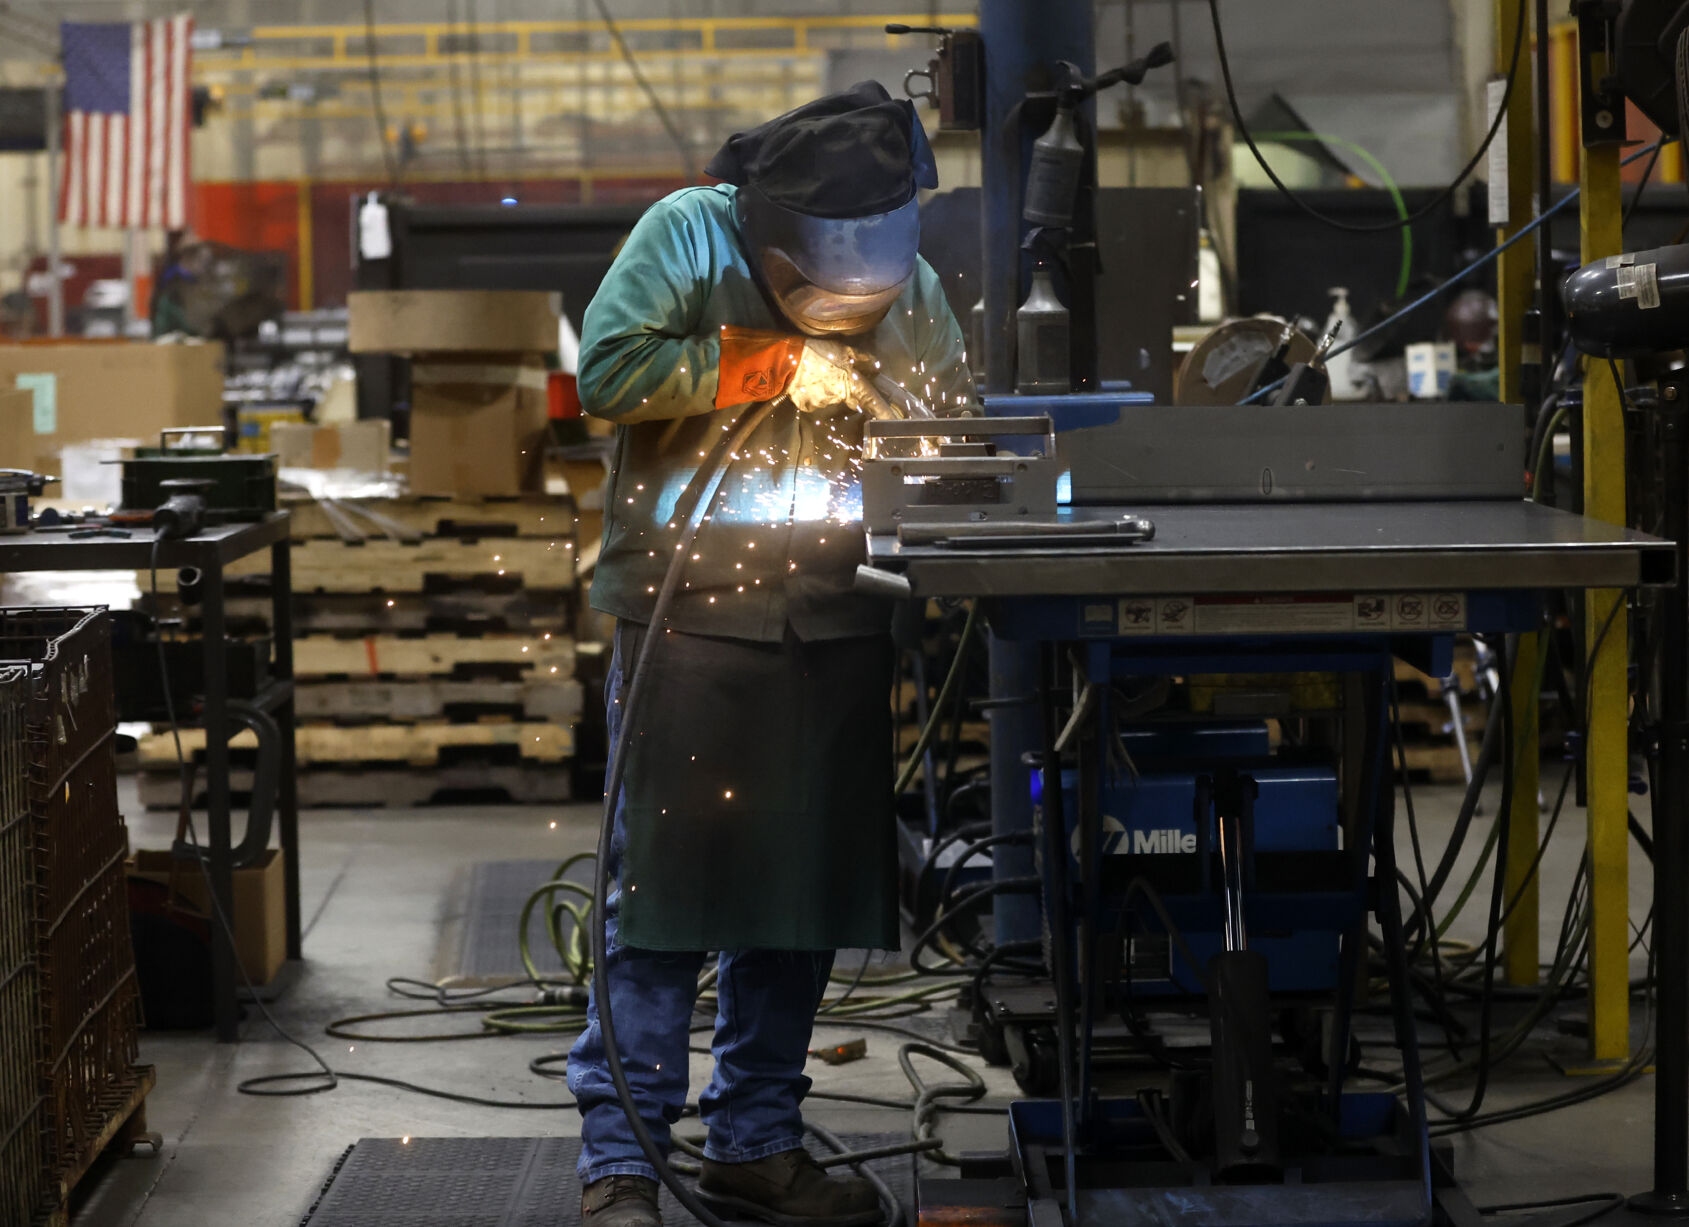 Cole Lineburg welds product at Mi-T-M Corp.    PHOTO CREDIT: JESSICA REILLY
Telegraph Herald